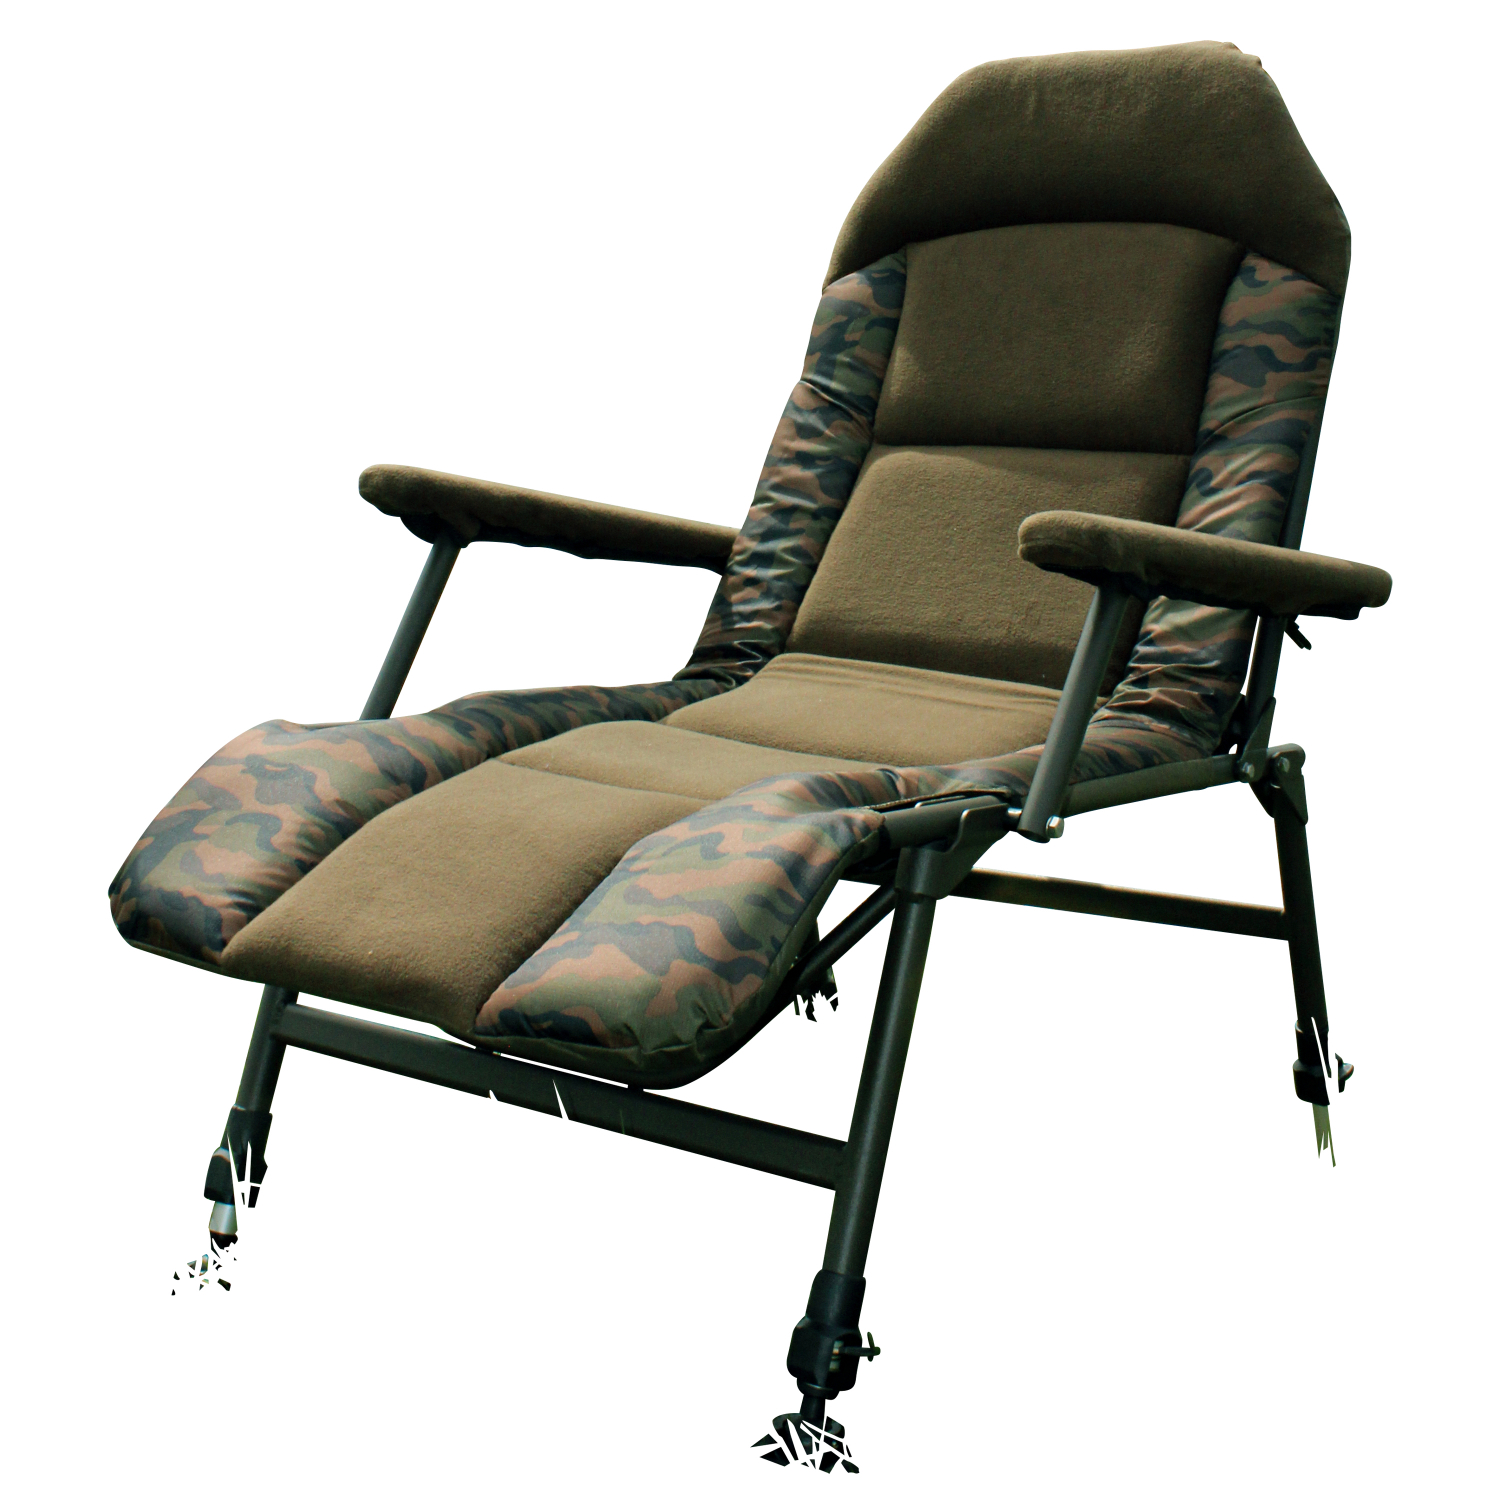 Kogha Camou Carp Chair Relax Comfor DLX 